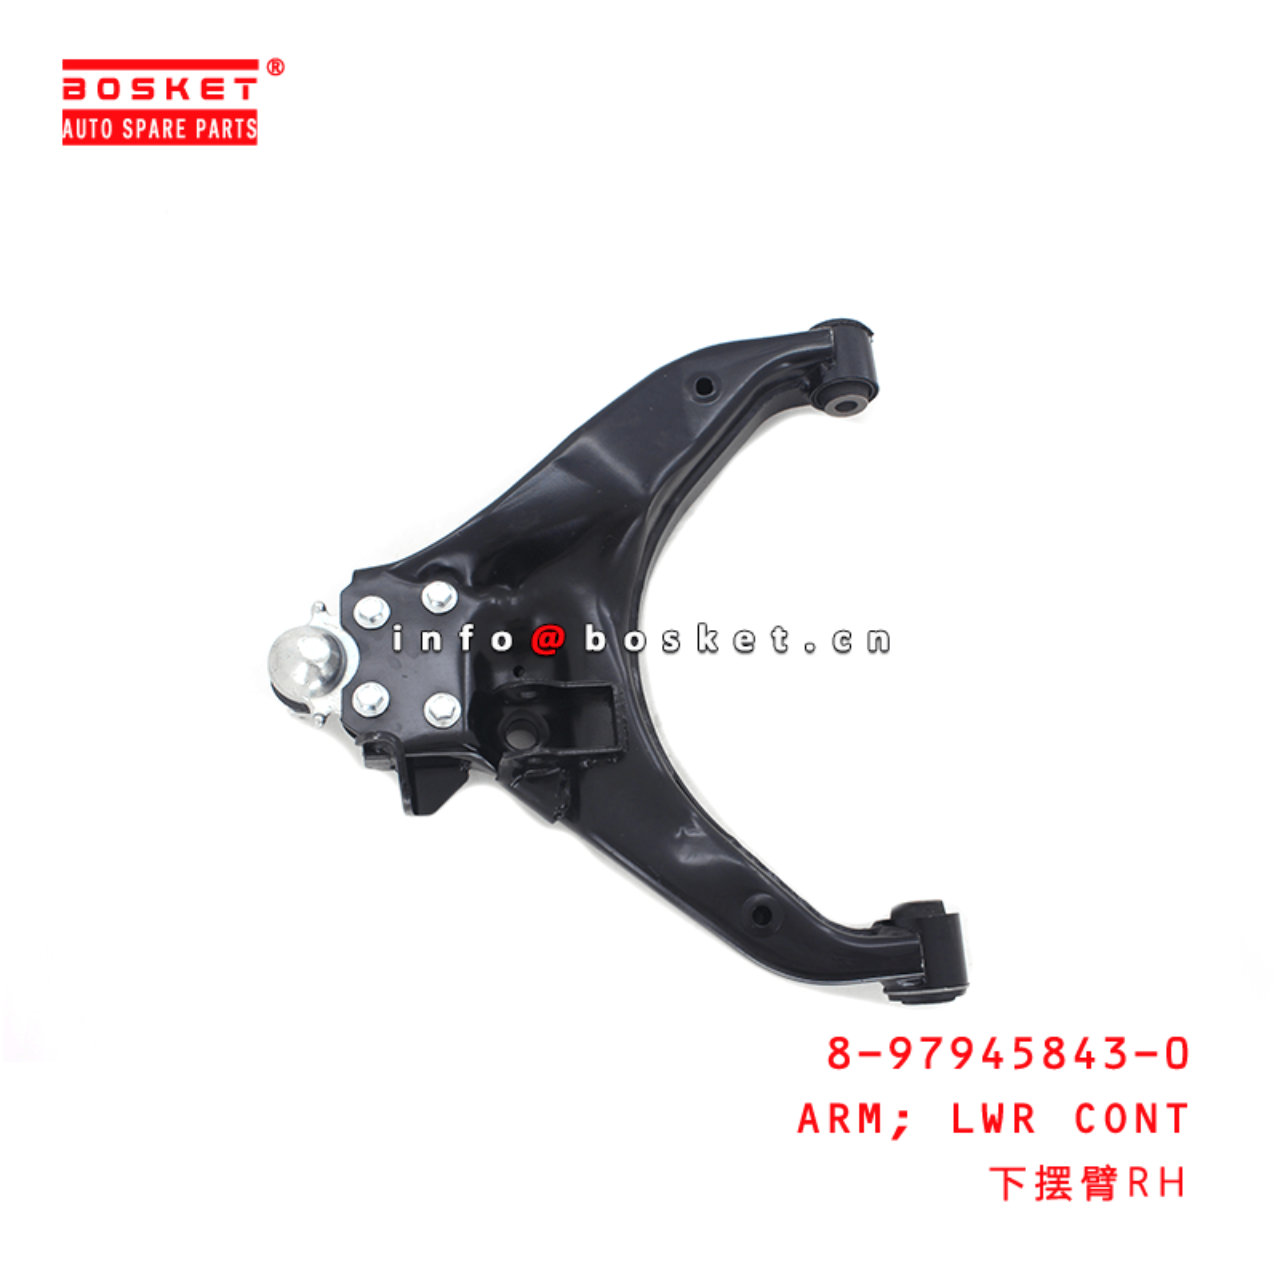  8-97945843-0 Lower Control Arm 8979458430 Suitable for ISUZU DMAX12 4X4